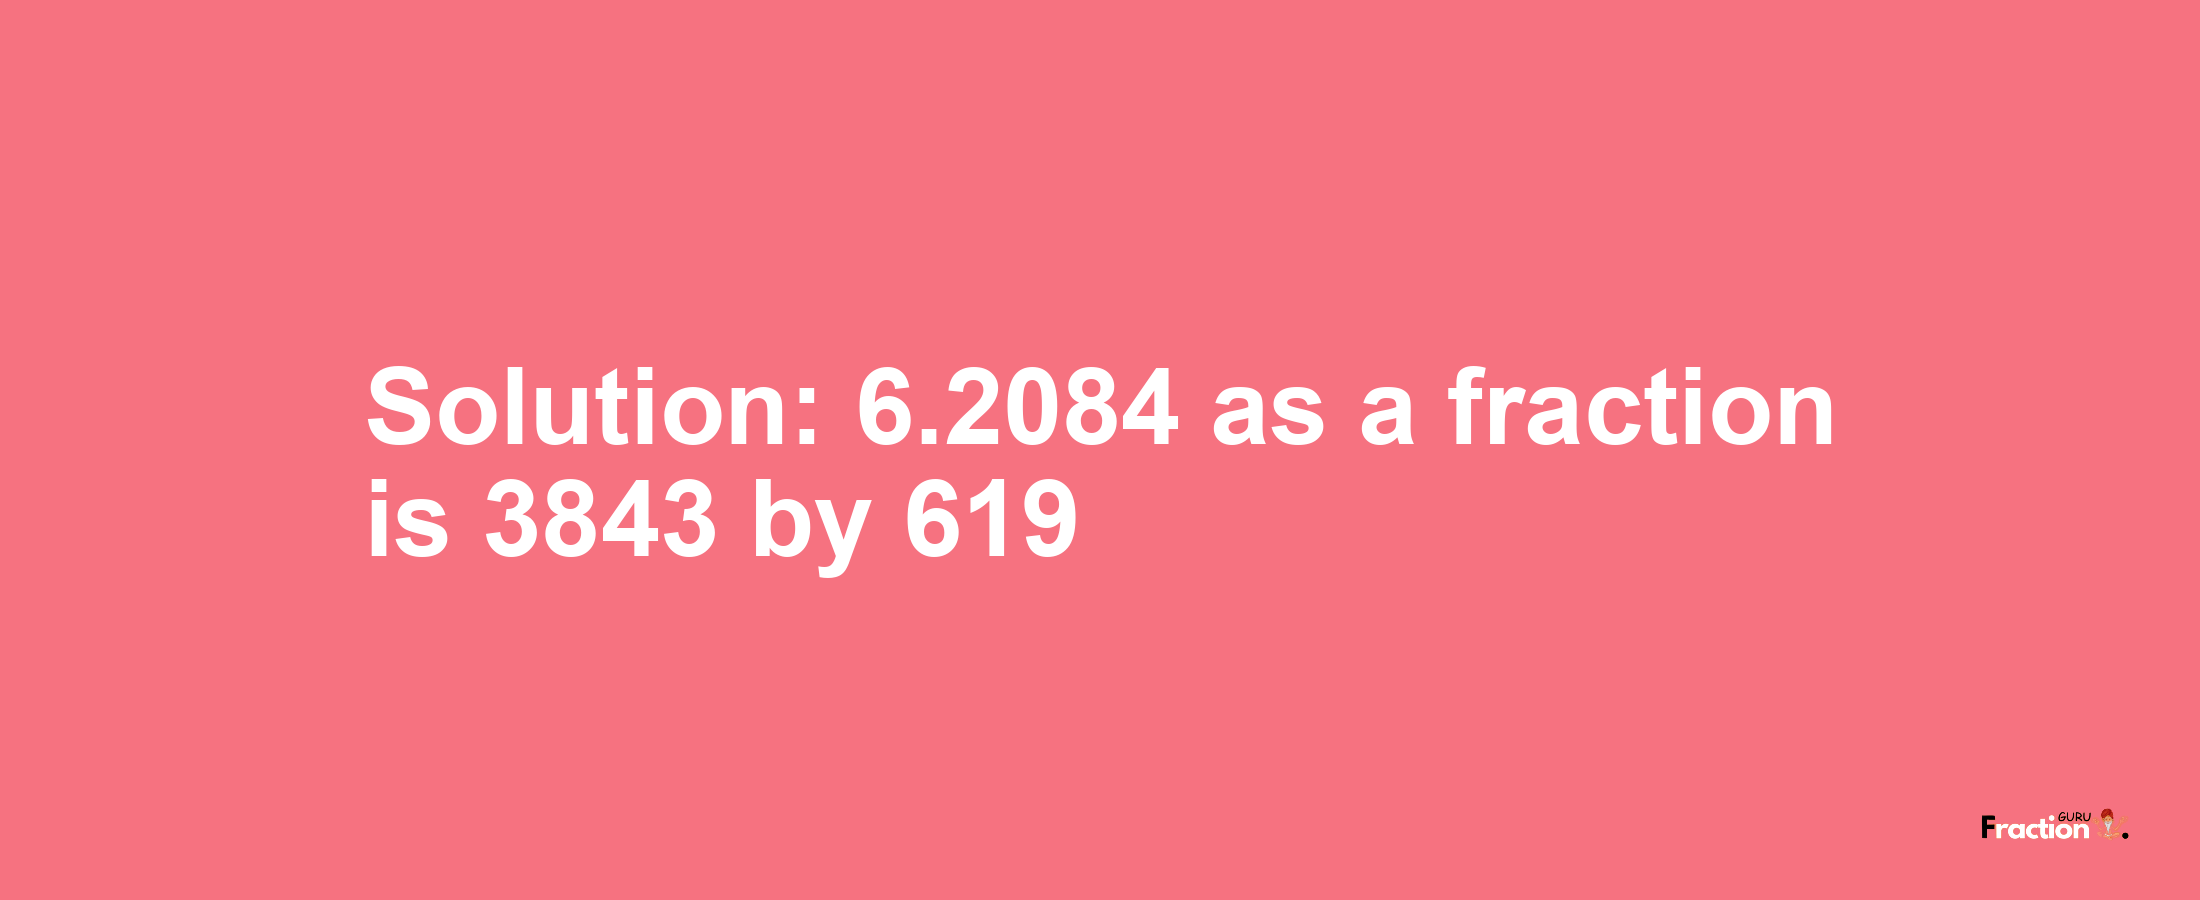 Solution:6.2084 as a fraction is 3843/619